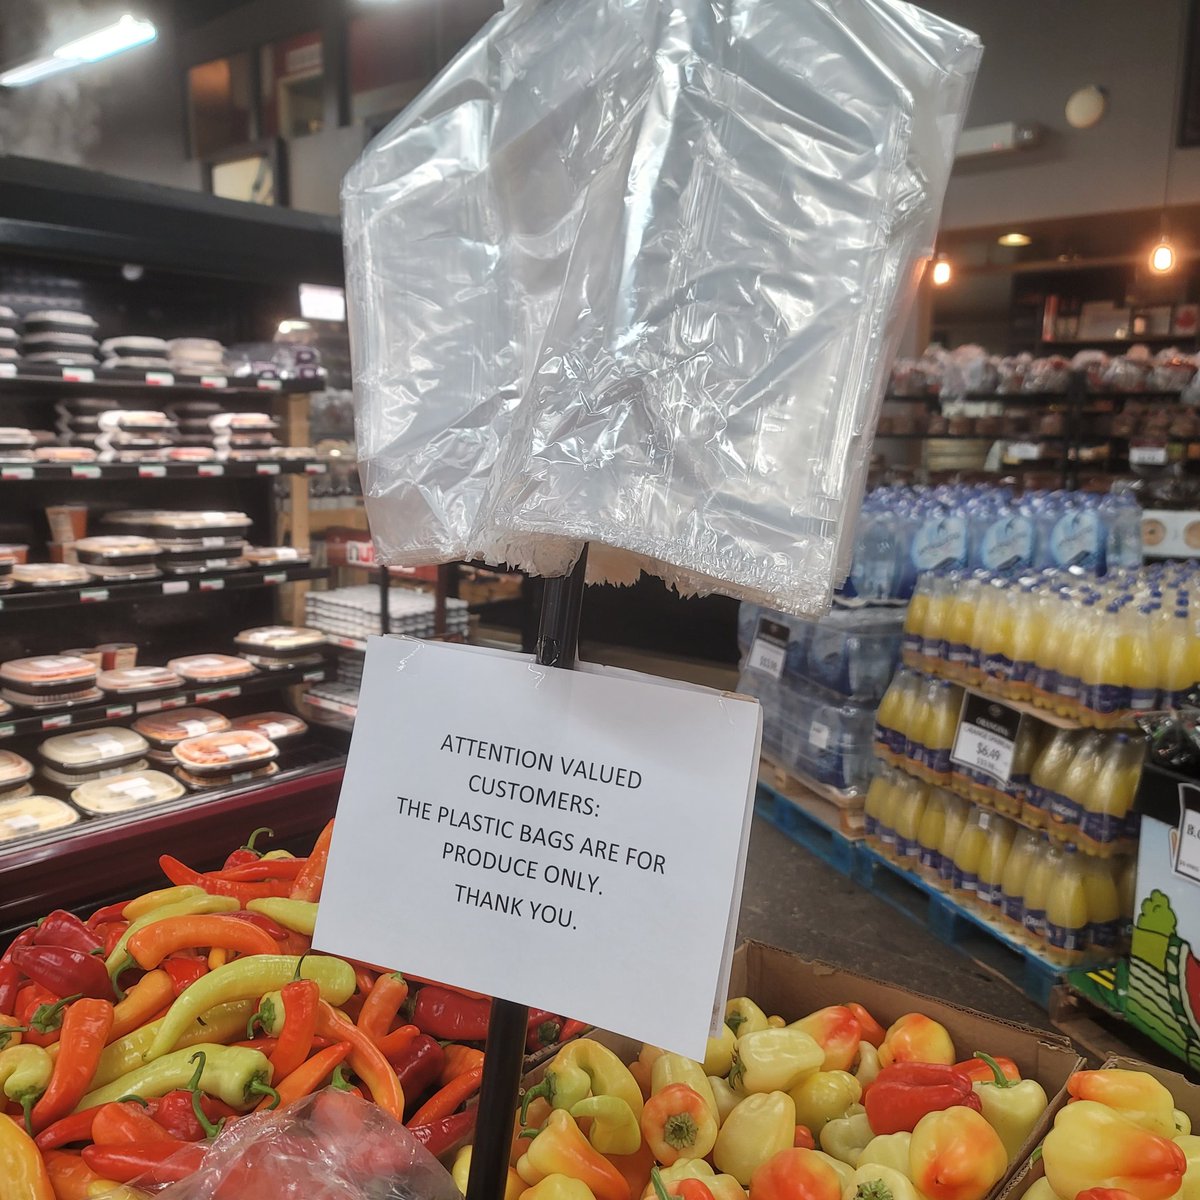 Plastic grocery bags are banned here in #yeg but you can still get a plastic bag for ya vegetables

Same vibes as wearing a mask to your restaurant table and then taking it off when sitting
#ClimateScamPolicies
#mentalGymnastics